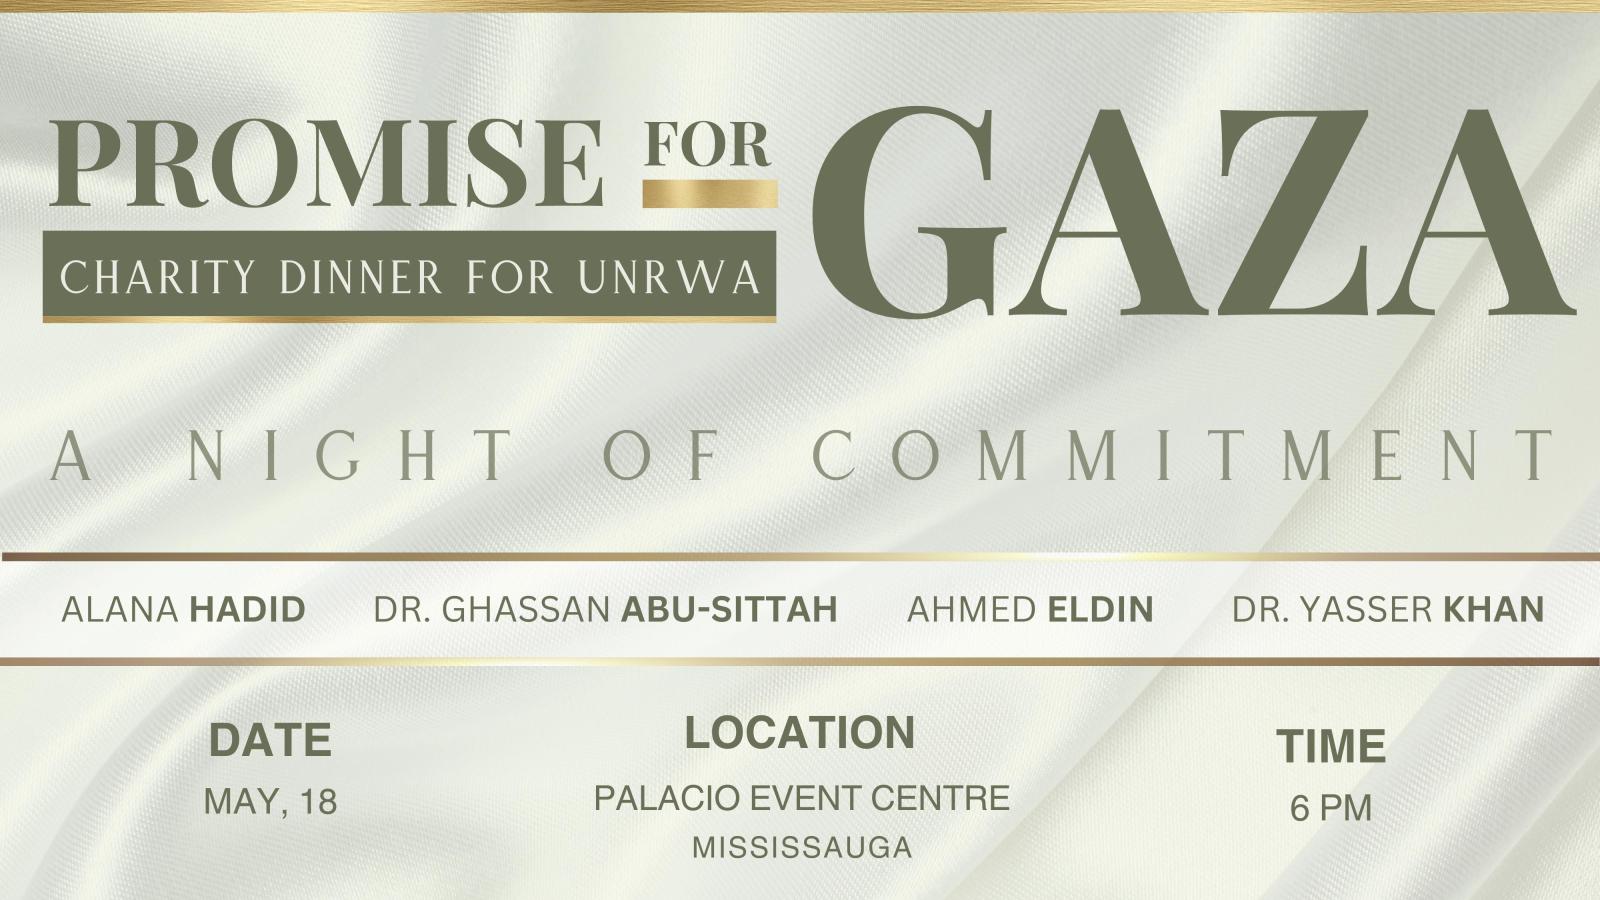 A Promise for Gaza: Fundraising Dinner for UNRWA